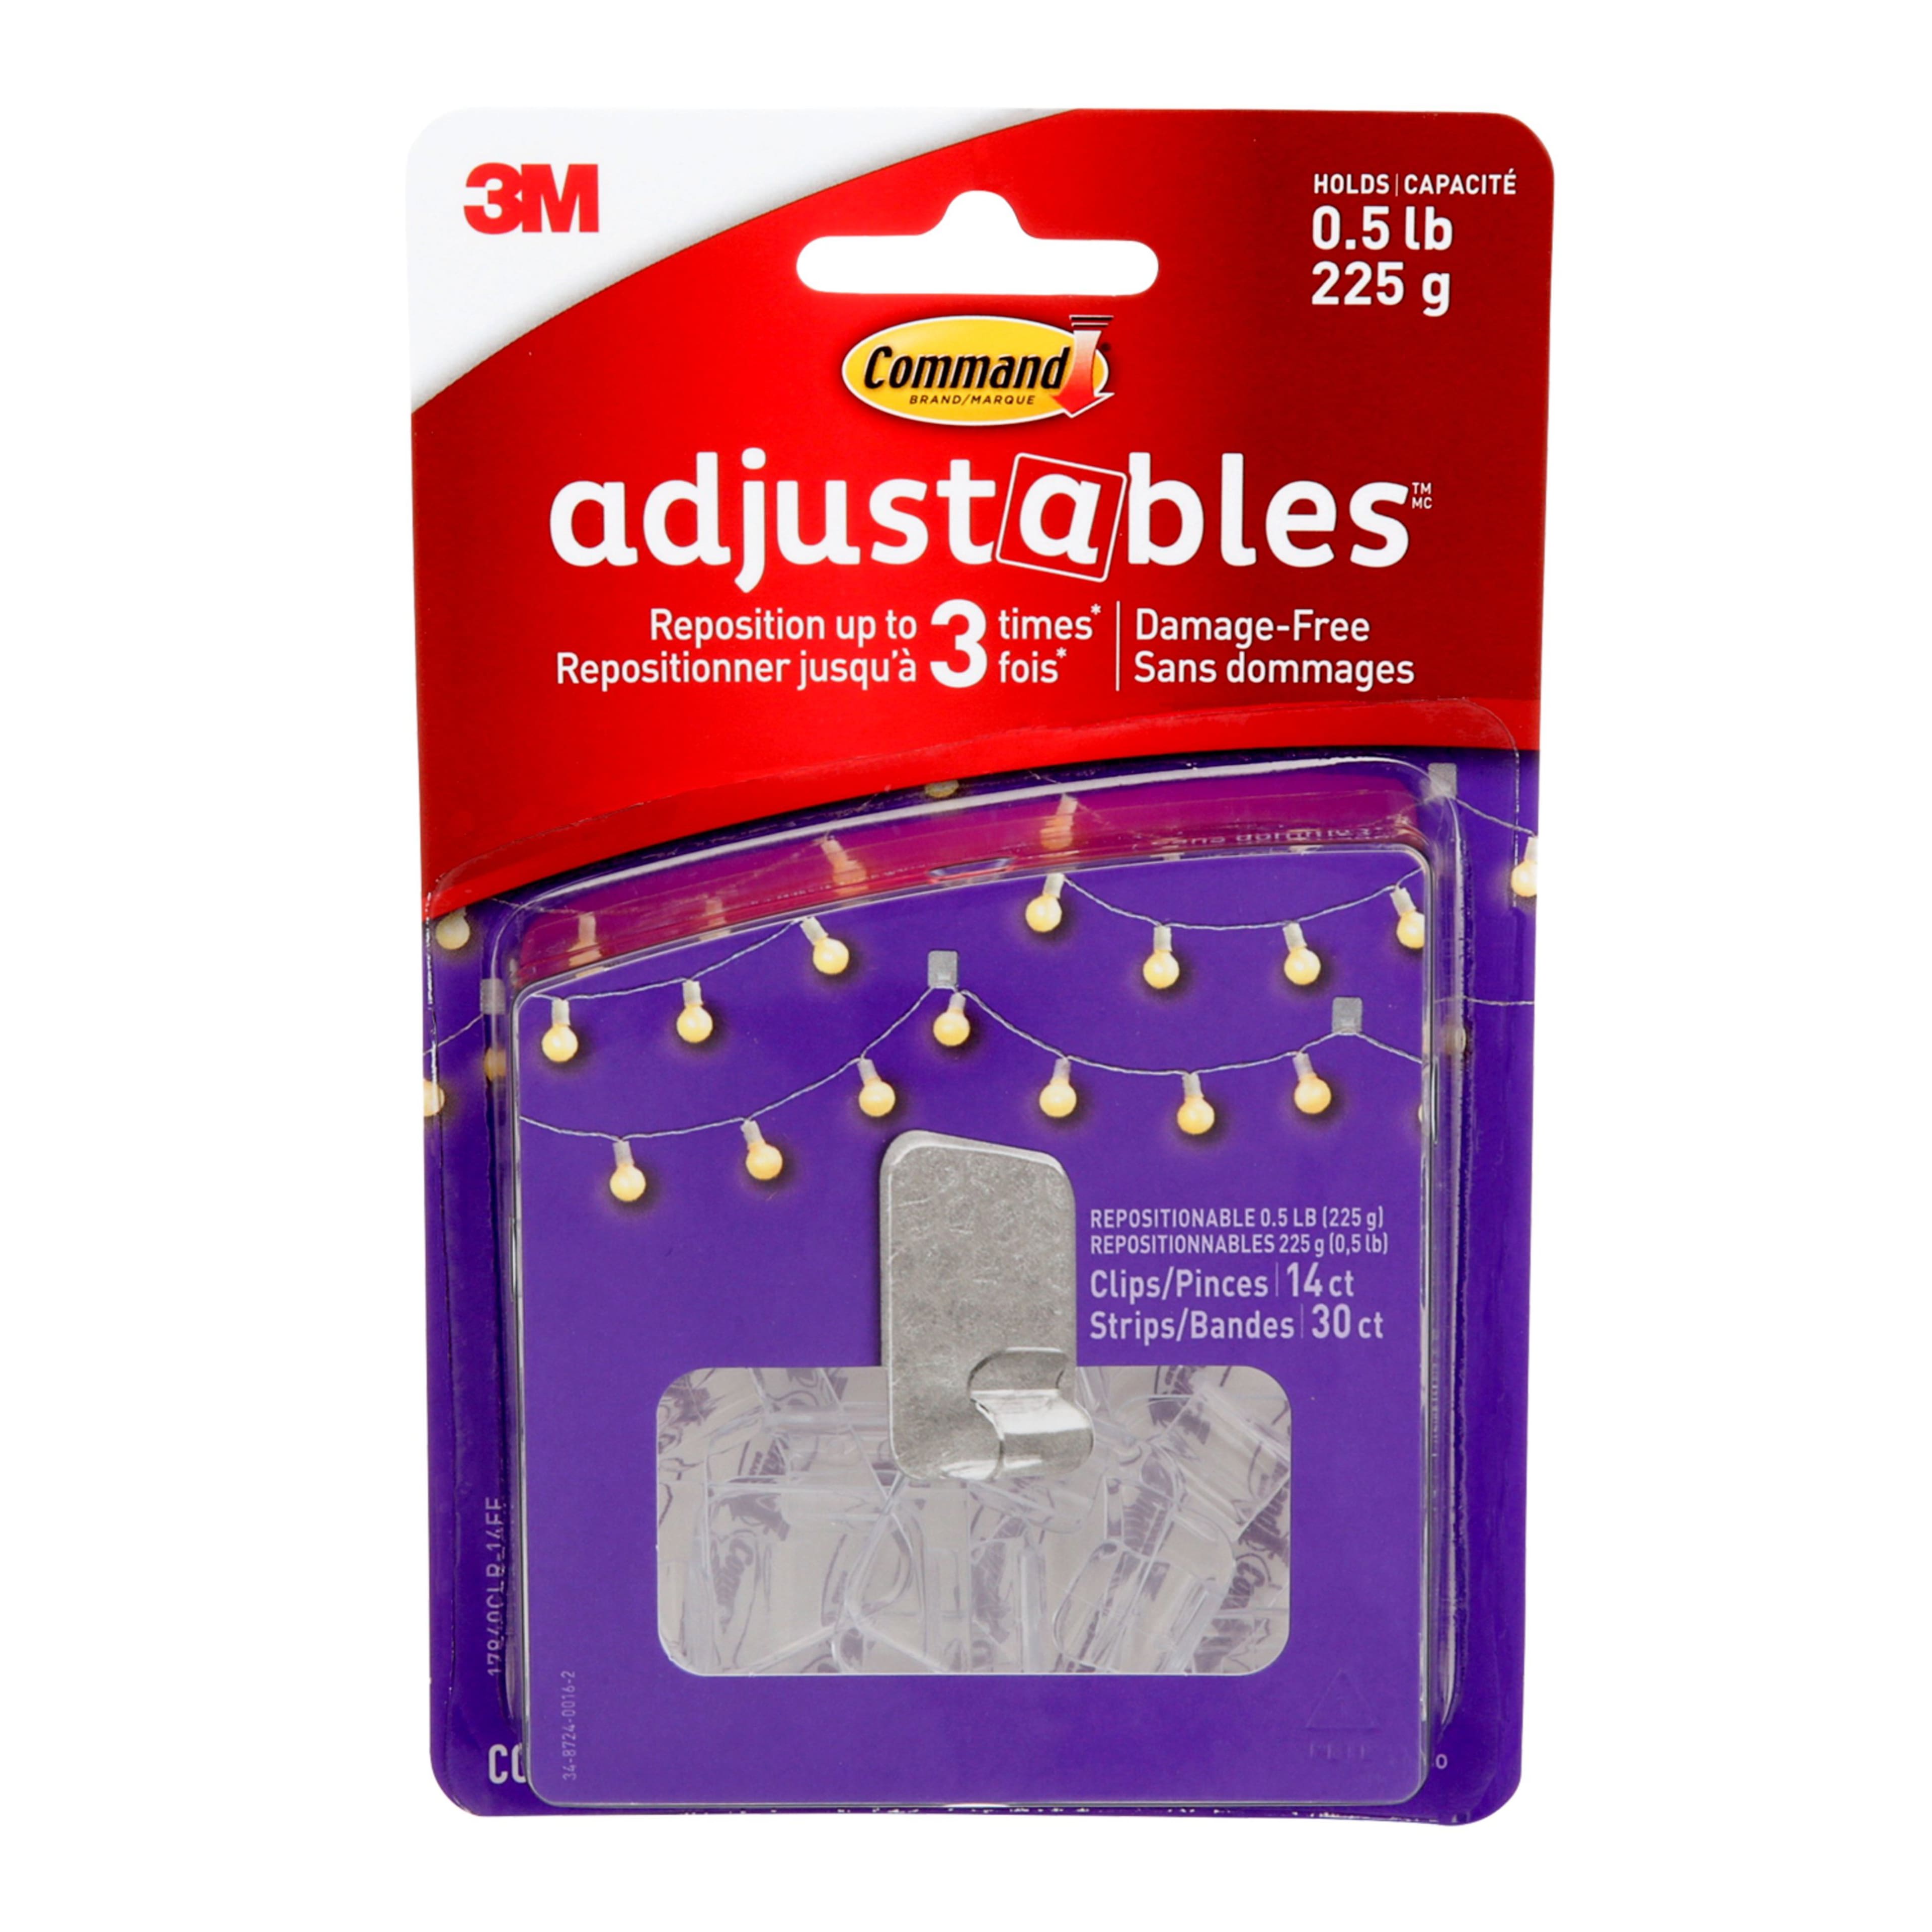 Buy in Bulk - 12 Packs: 14 ct. (168 total) Command® Adjustables™ Clear  Light Clips